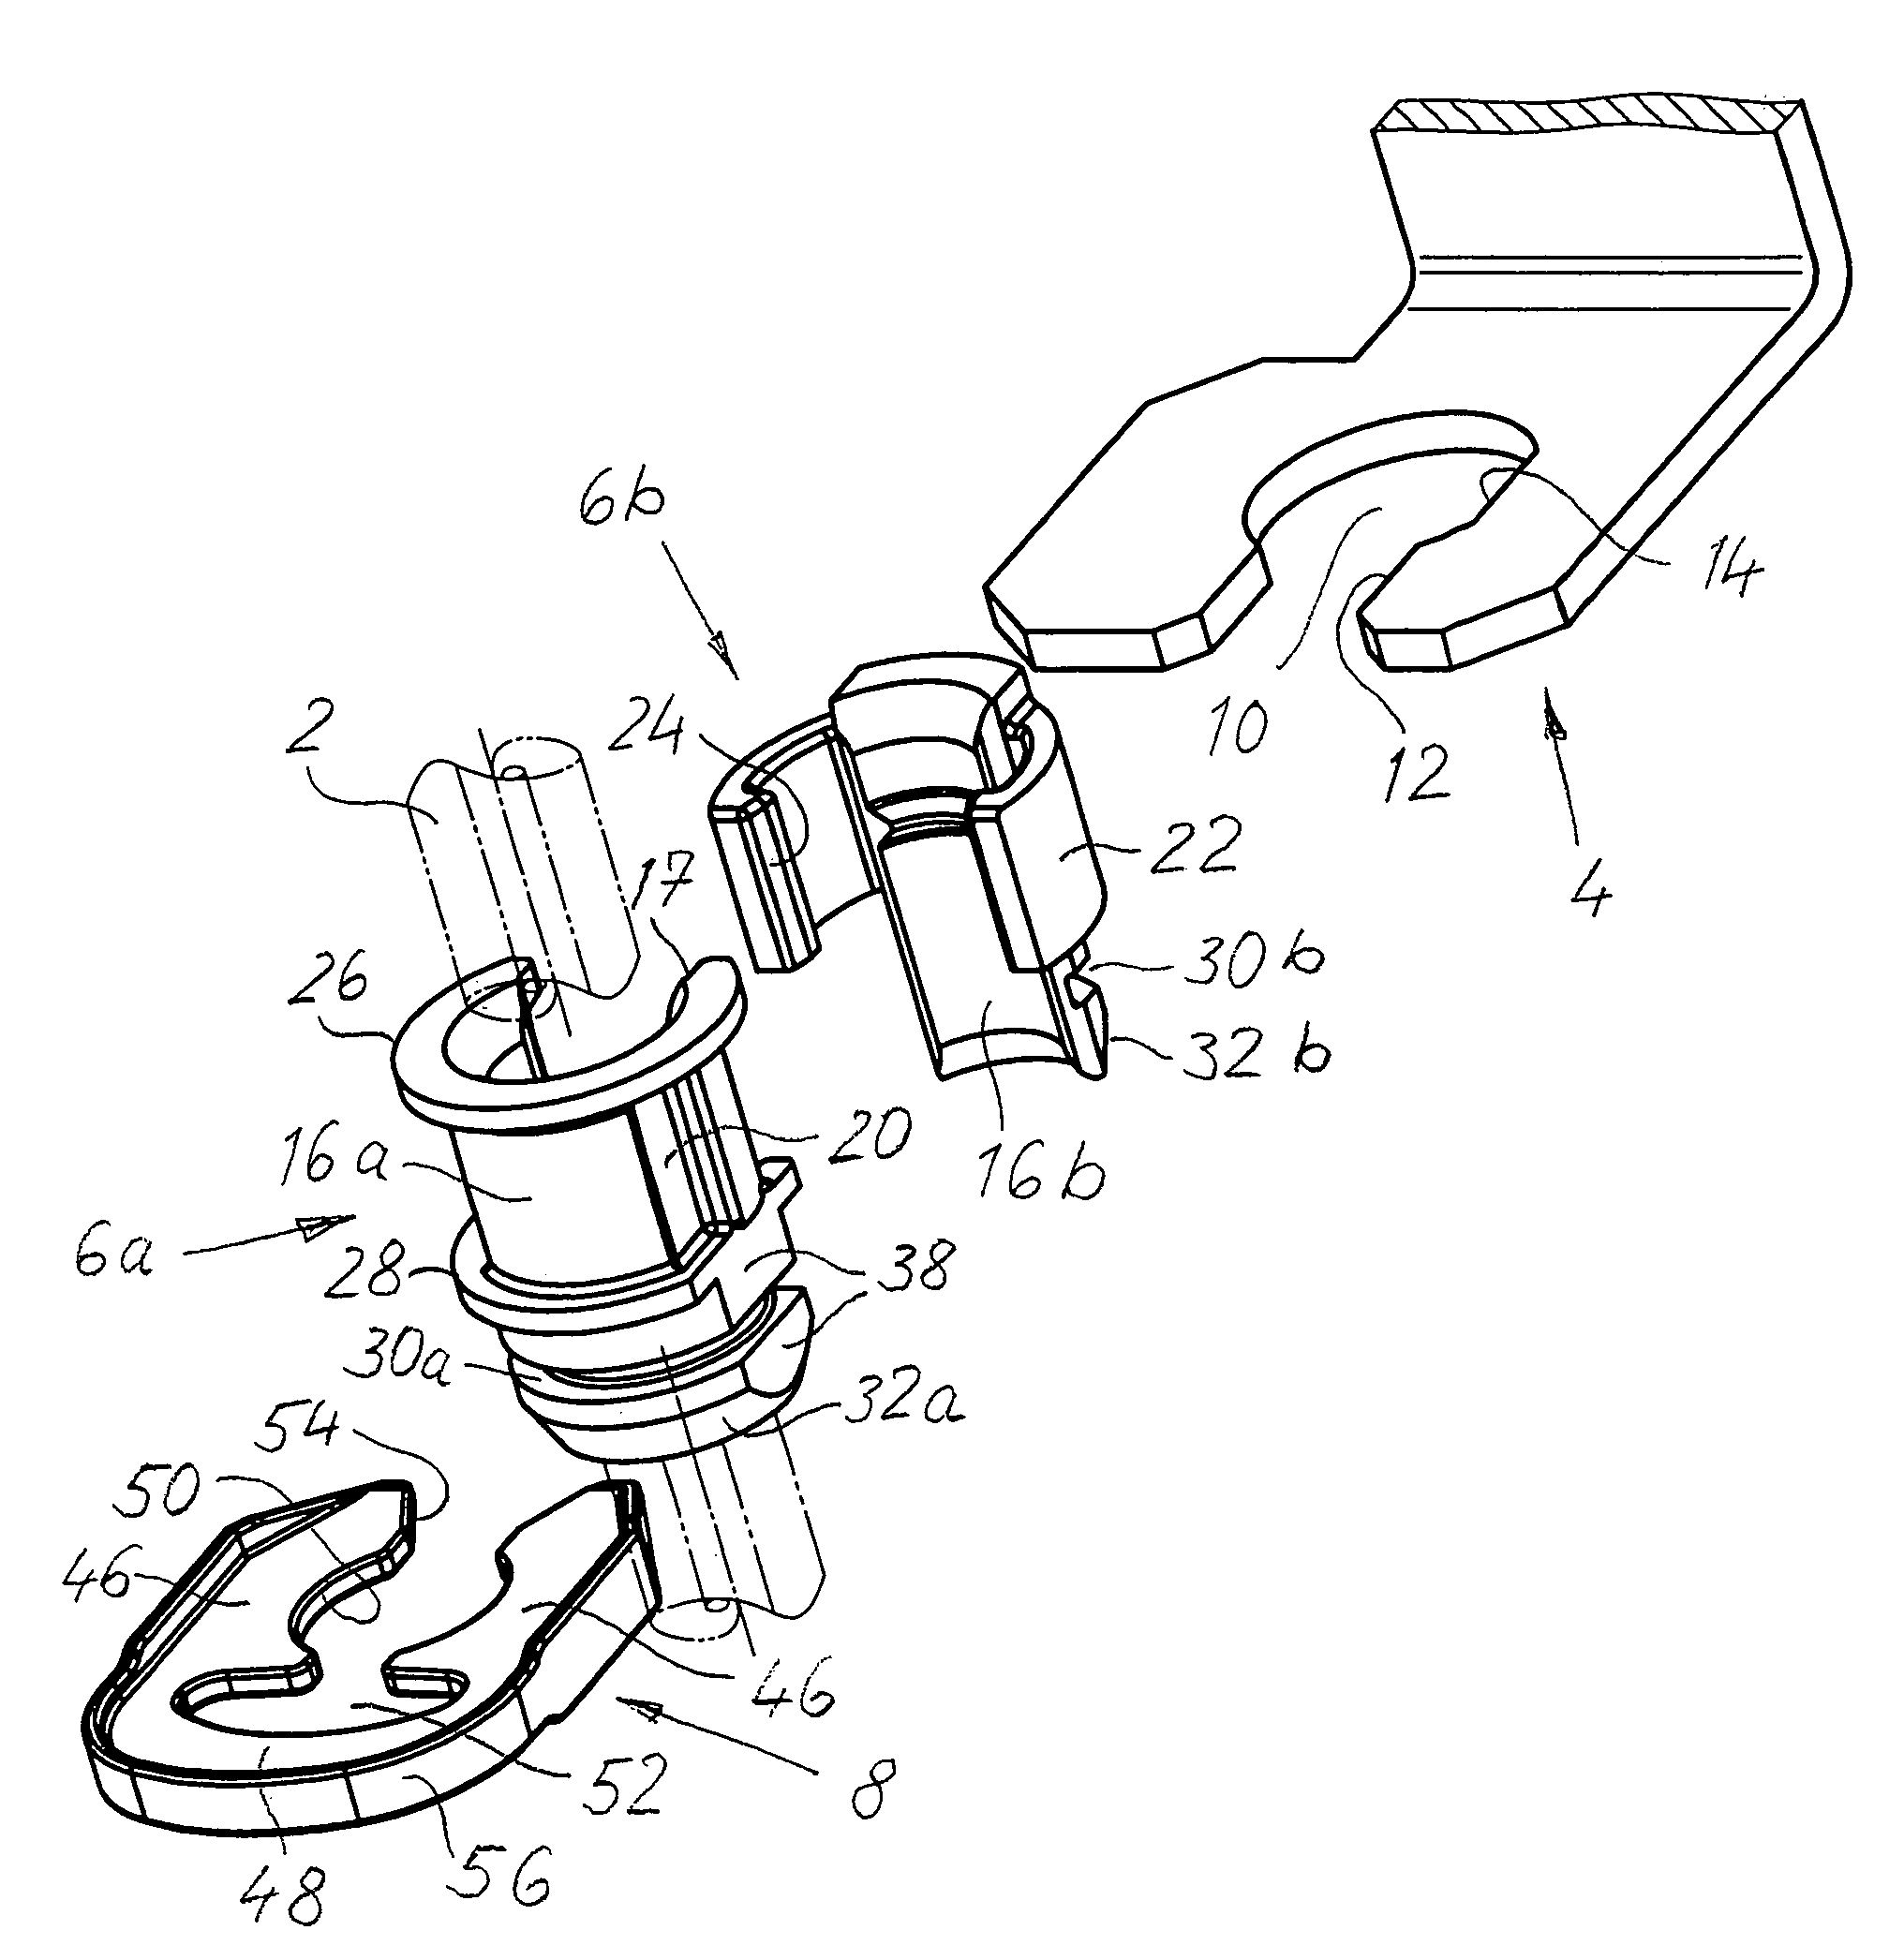 Joining assembly for fixing a tube at a holder